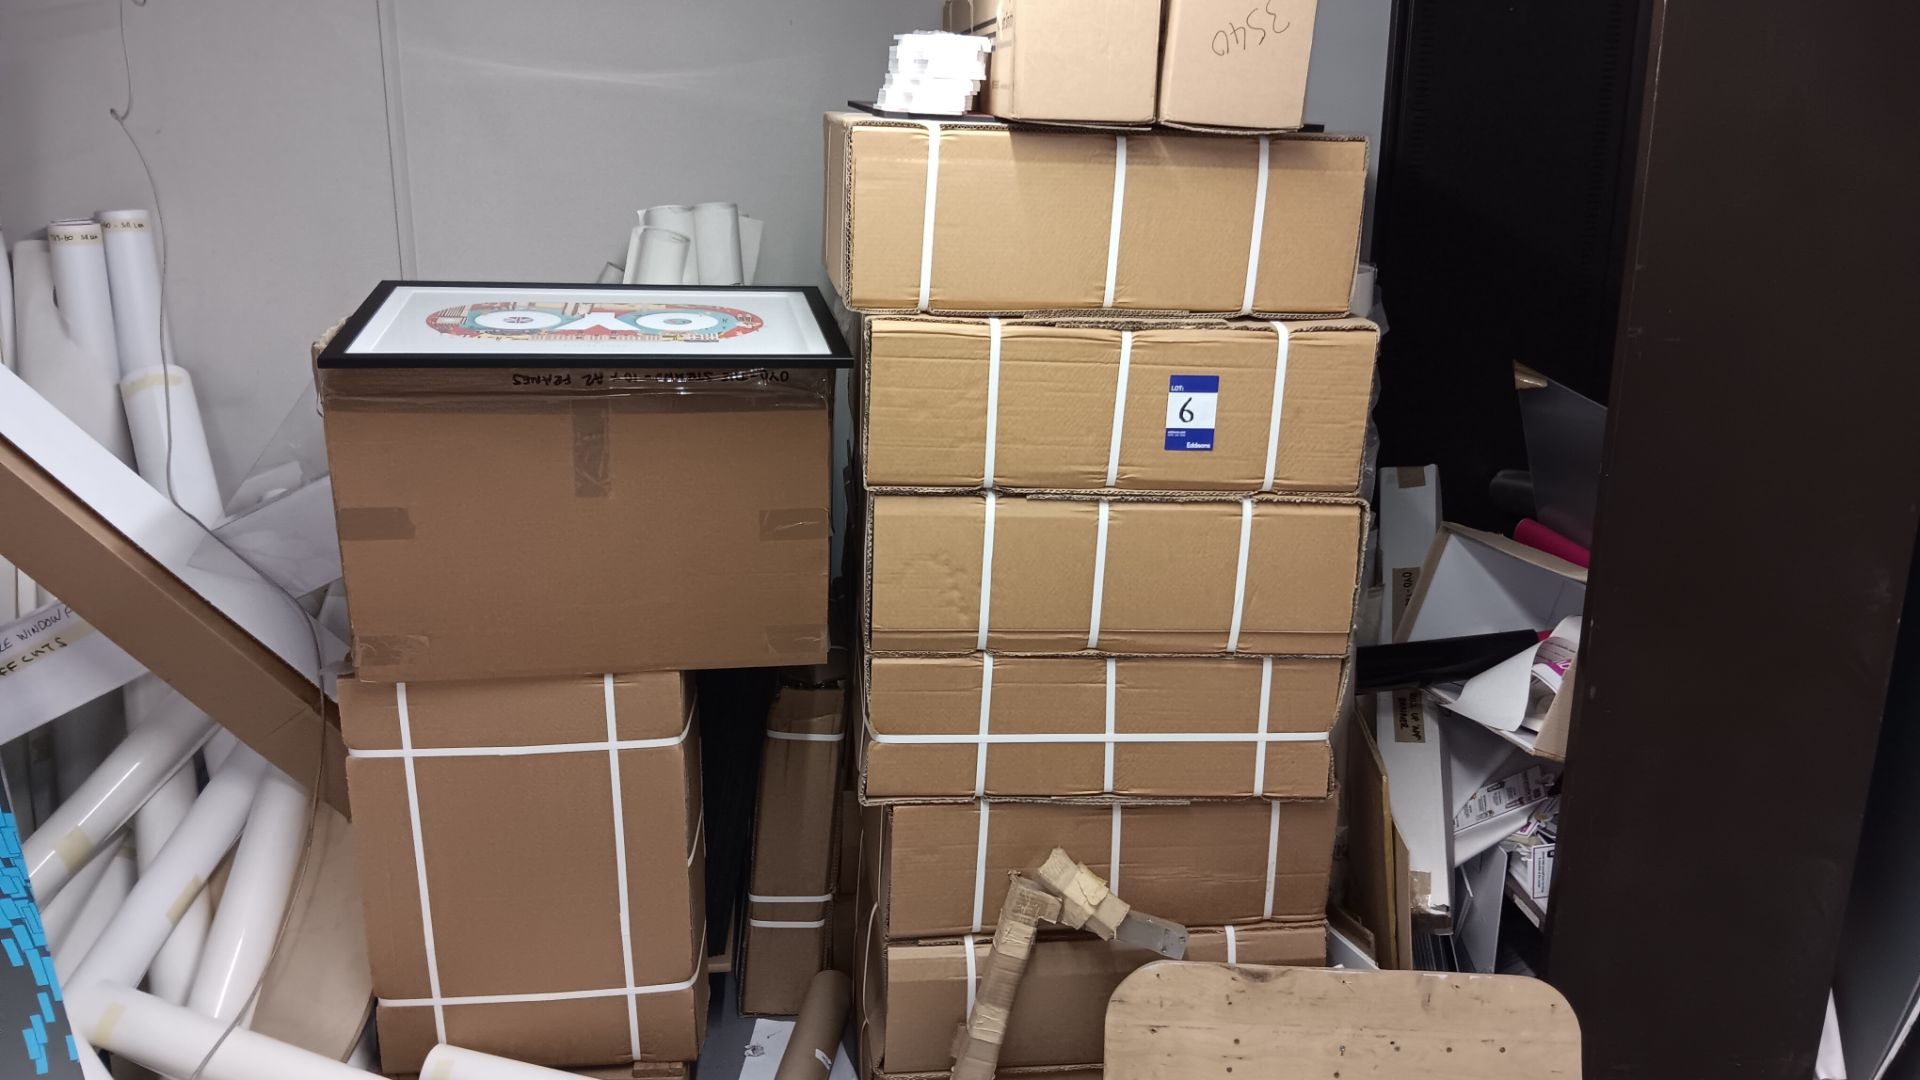 16 x boxes on A2 photo frames – Located in Unit 1 - Bild 2 aus 2